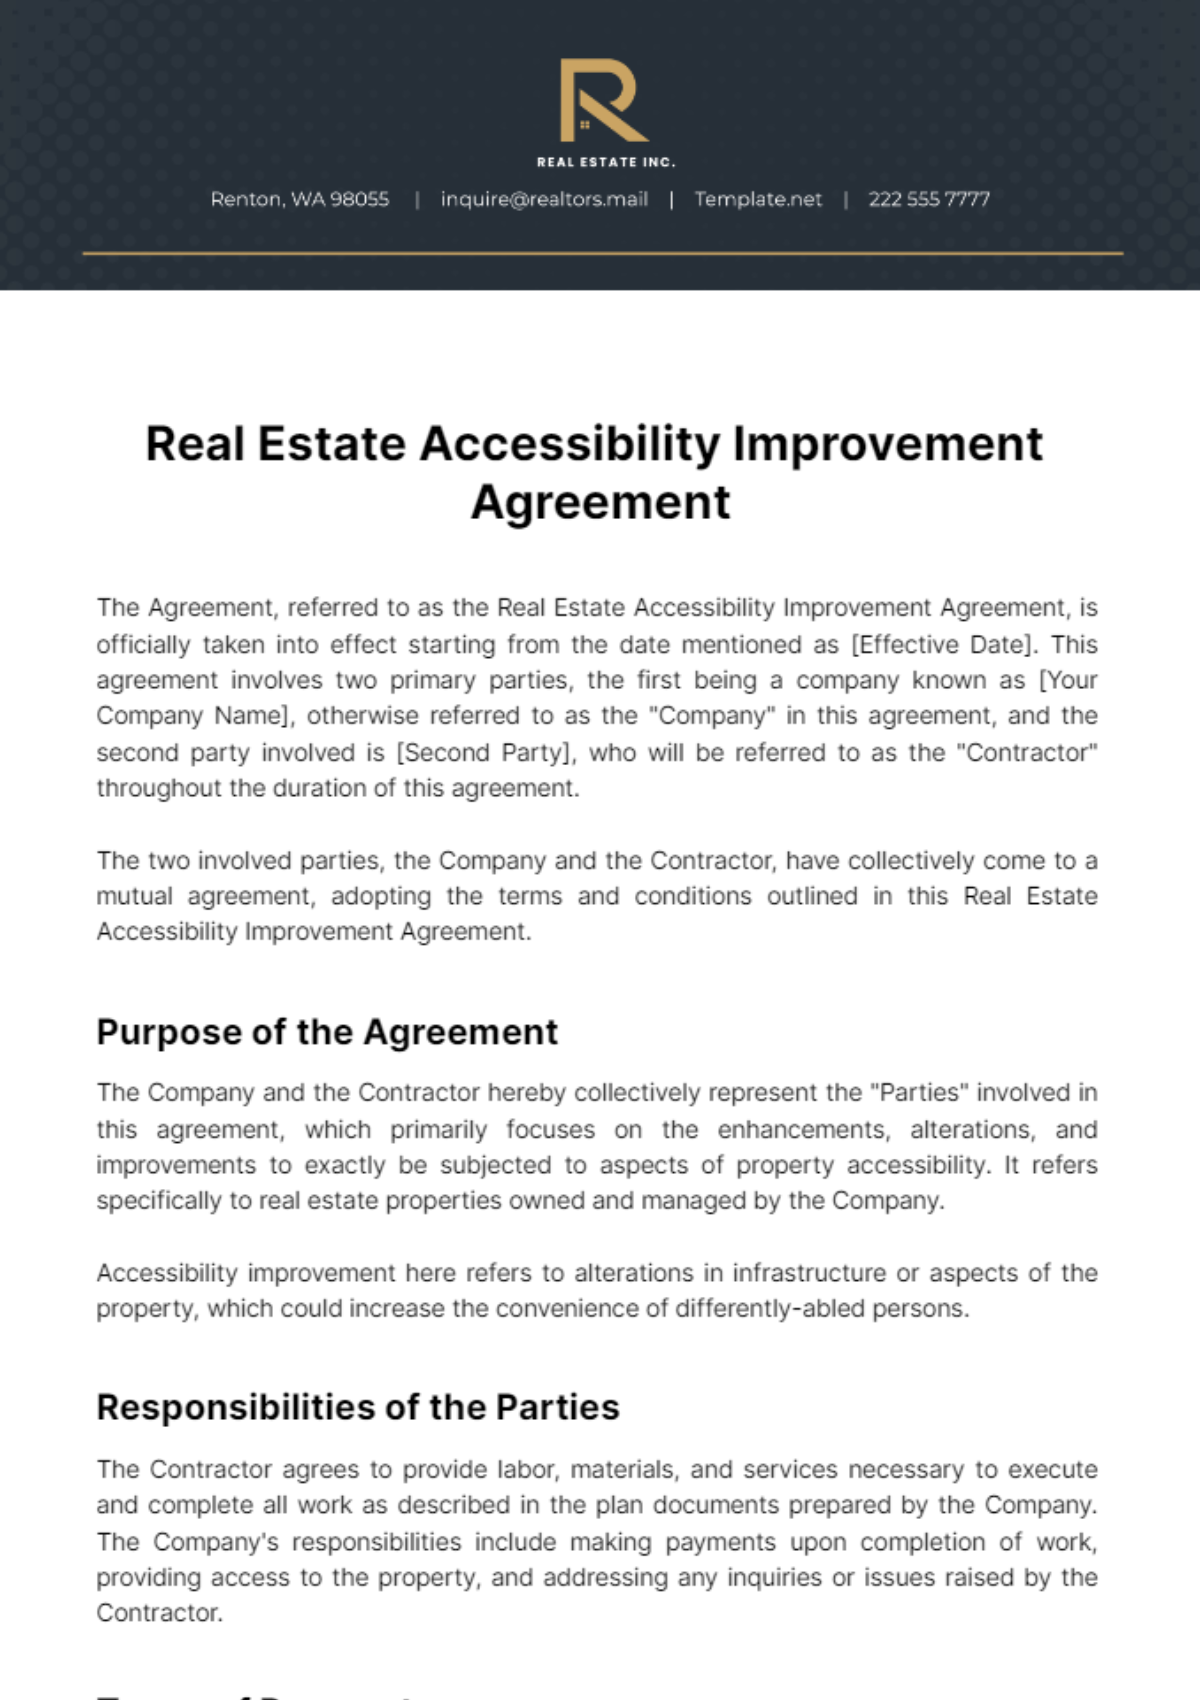 Real Estate Accessibility Improvement Agreement Template